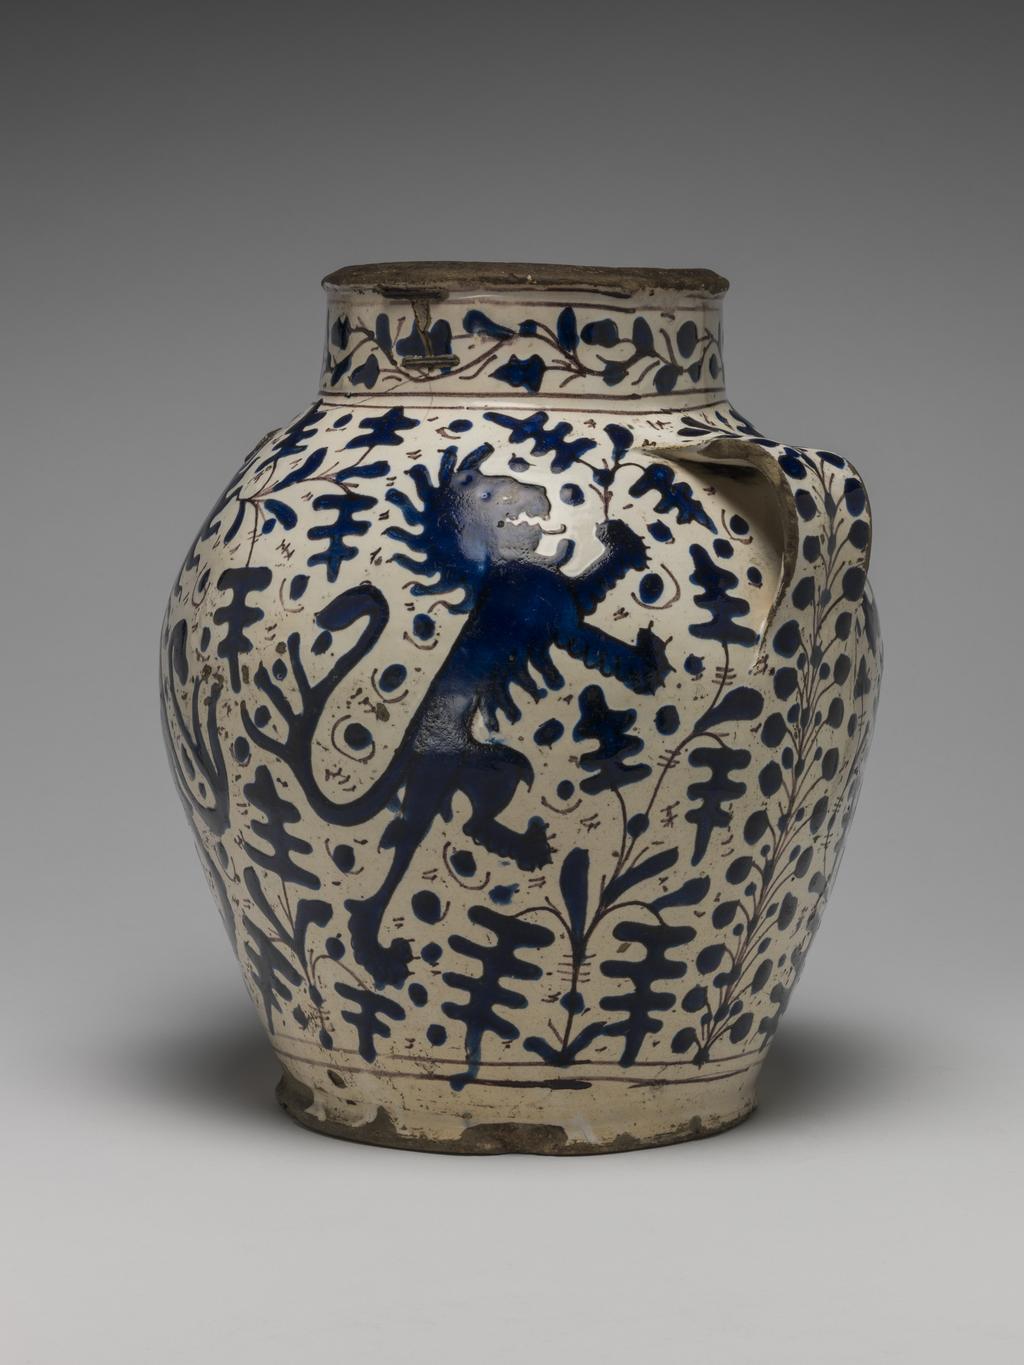 An image of Maiolica. Pharmacy or storage jar. Unknown maker, Florence. Both sides are decorated with two lions rampant addorsed, each holding a spray of oak leaves in its raised paw, surrounded by sprays of oak leaves with dots in the background. Round the lower part of the body there are two horizontal manganese bands. On the neck, between pairs of horizontal manganese bands, there are oak leaves on a wavy stem. On each handle, and continuing down the side of the jar beneath it, is a fern frond or stalk with twigs branching off on each side and terminating in small round berries. Buff earthenware, tin-glazed creamy-white on the interior and exterior; the rim and base unglazed. Painted in bright, extremely shiny relief-blue with manganese outlines. Height, whole, 25.8 cm, diameter, mouth, 12.4 cm, diameter, base, 14.5 cm, width, across handles, 23.0 cm, circa 1420-1450. Renaissance.